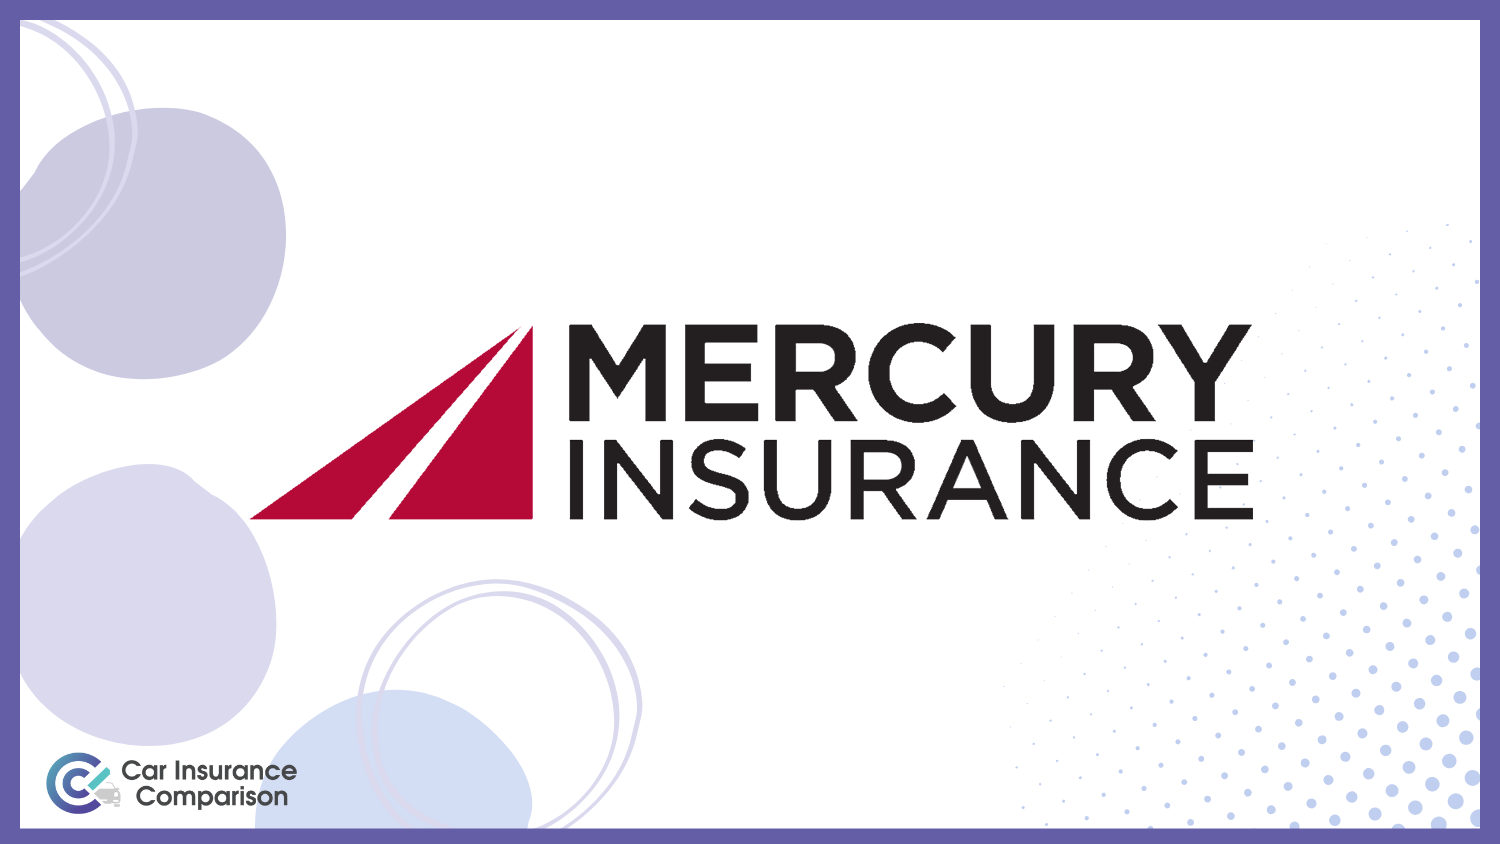 Mercury: Cheap Car Insurance With Breakdown Coverage